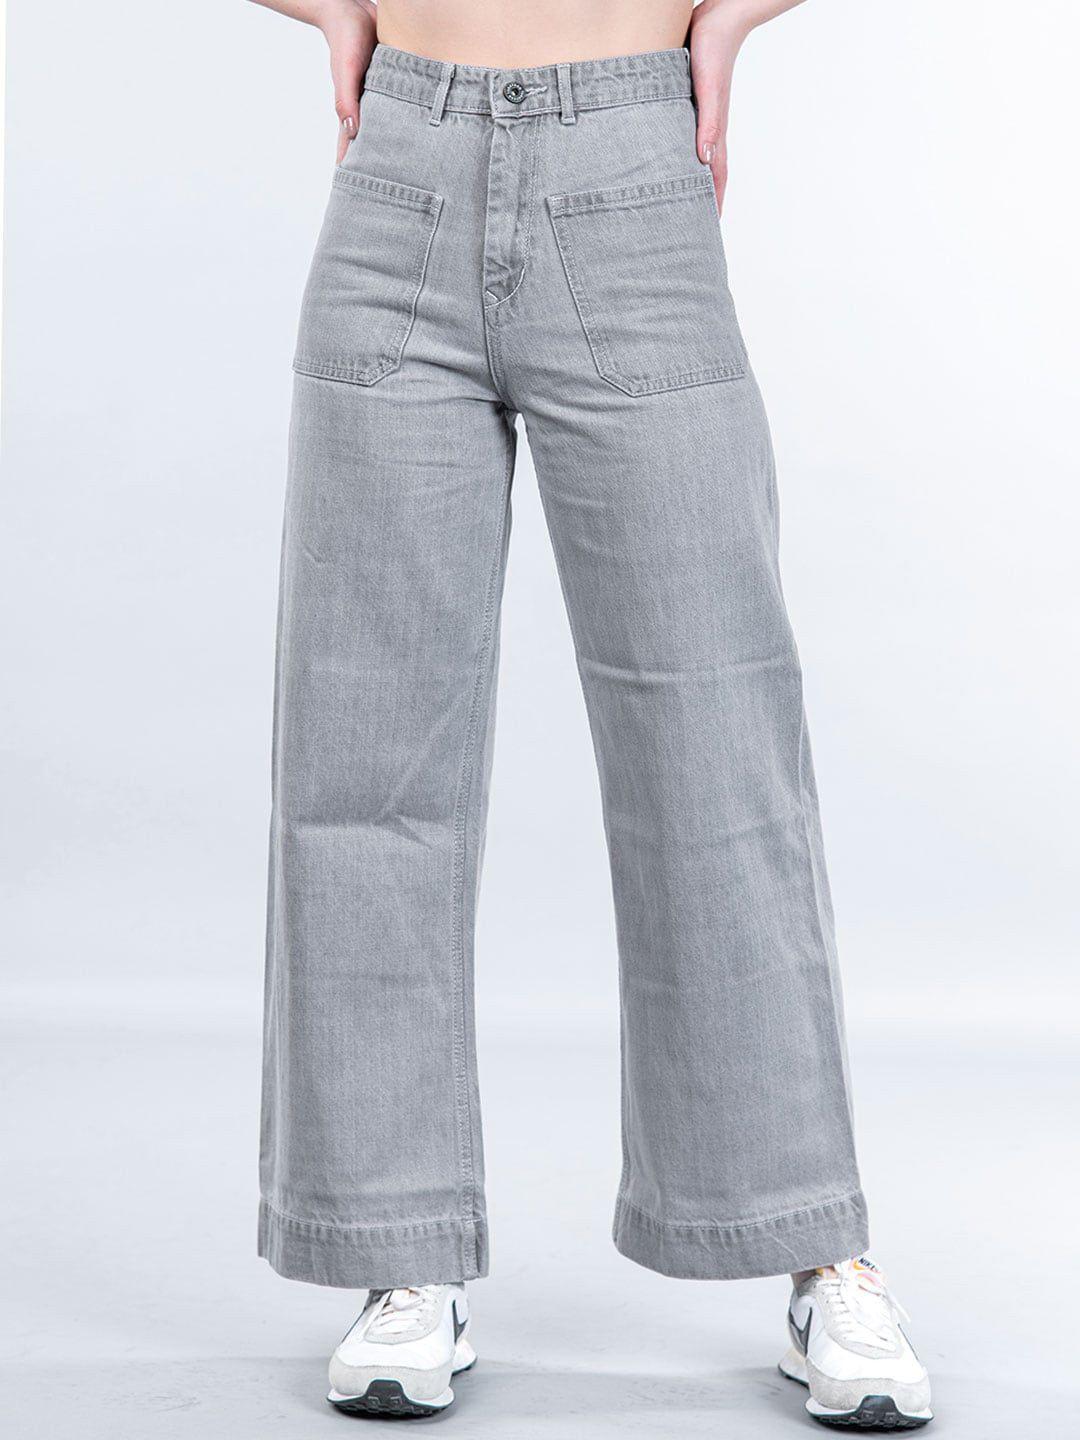 tistabene-women-comfort-stretchable-wide-leg-jeans